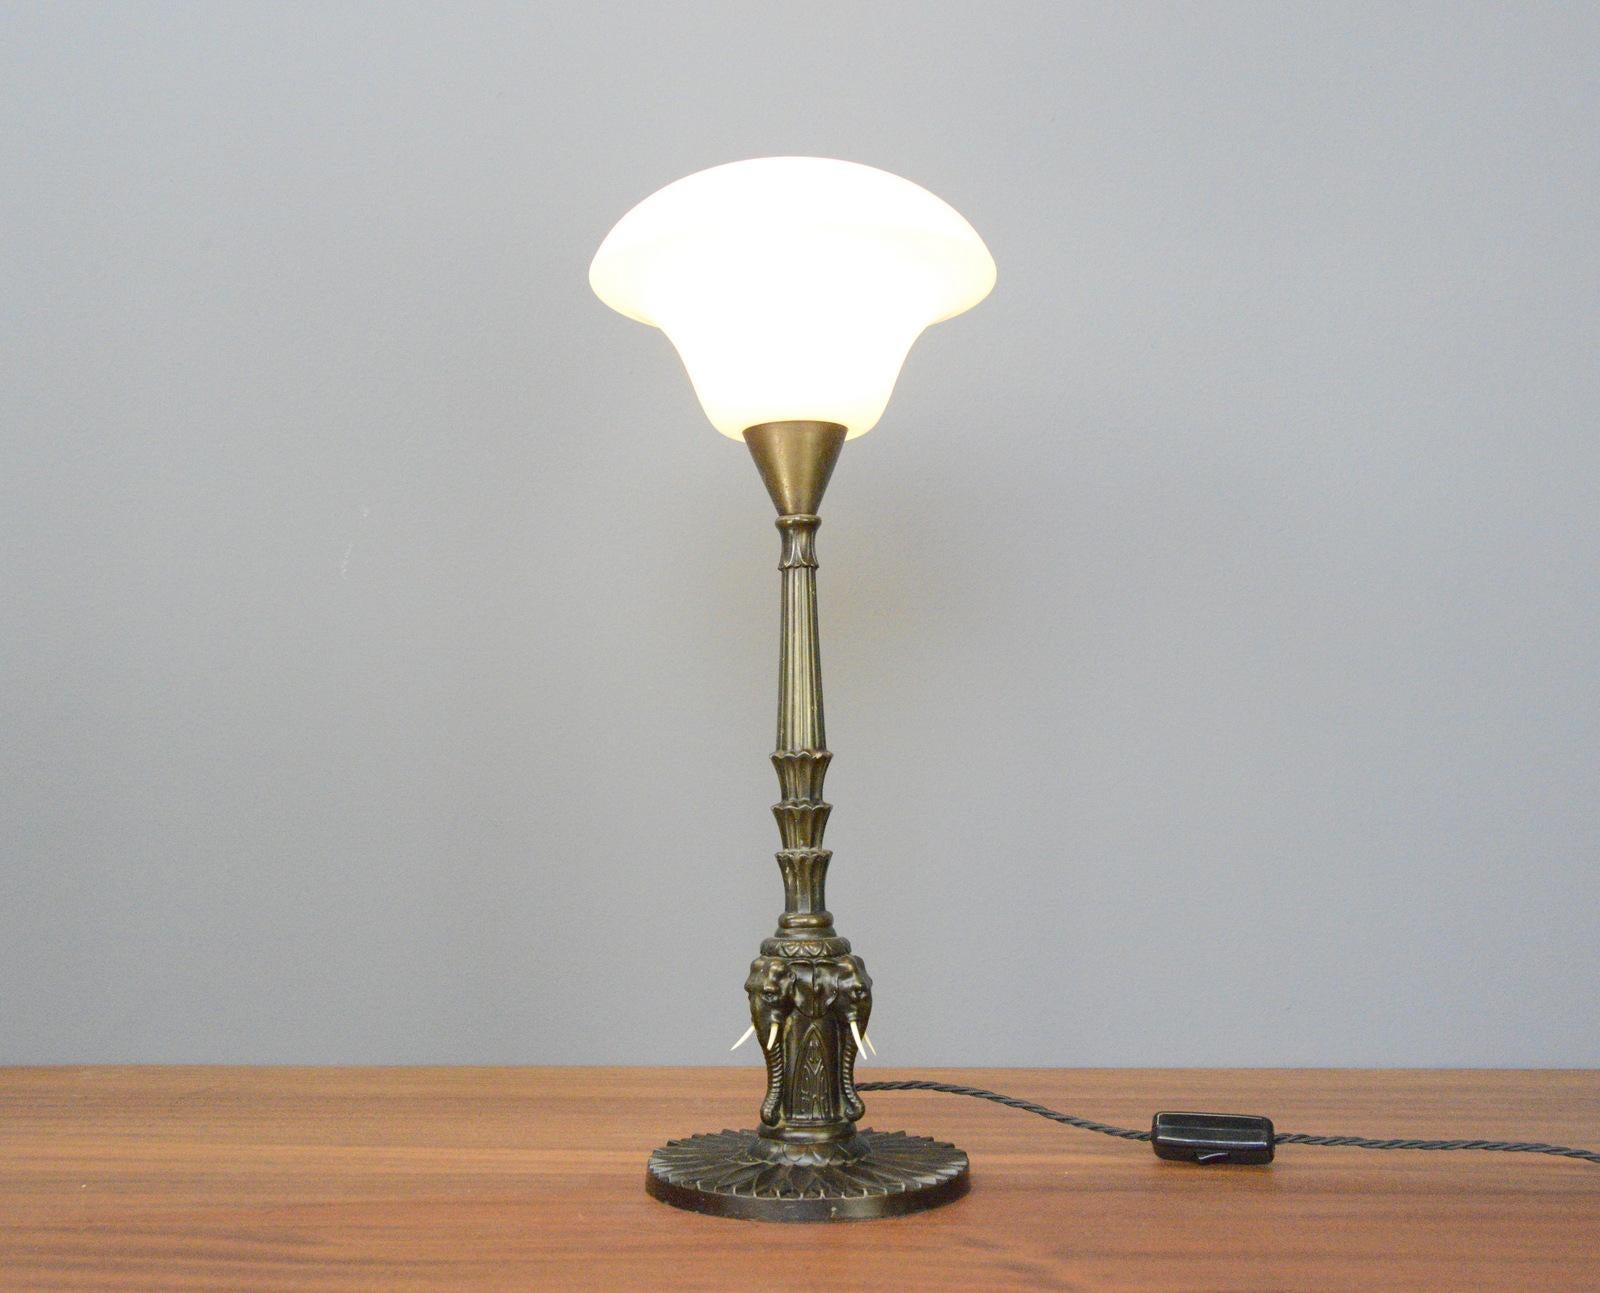 Early 20th century elephant table lamp

- Aged bronze body with cast iron Elephant heads x3
- Takes E27 fitting bulbs
- Opaline glass shade
- On/Off toggle switch on the cable
- Danish ~ 1910
- 52cm tall x 24cm wide 

Condition